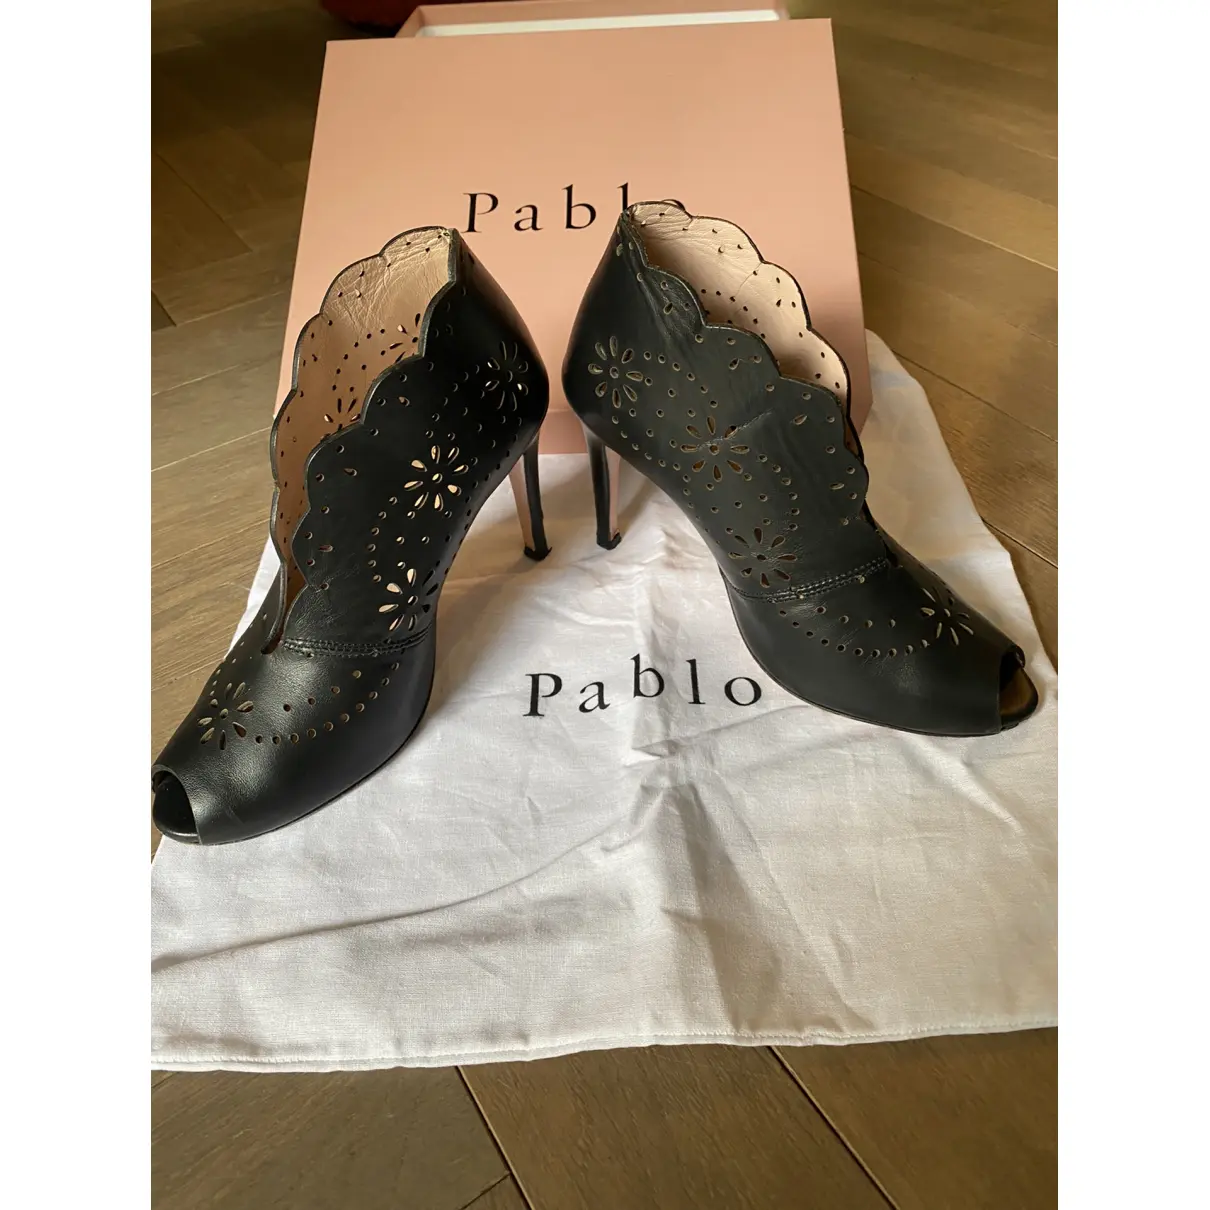 Buy Pablo Leather ankle boots online